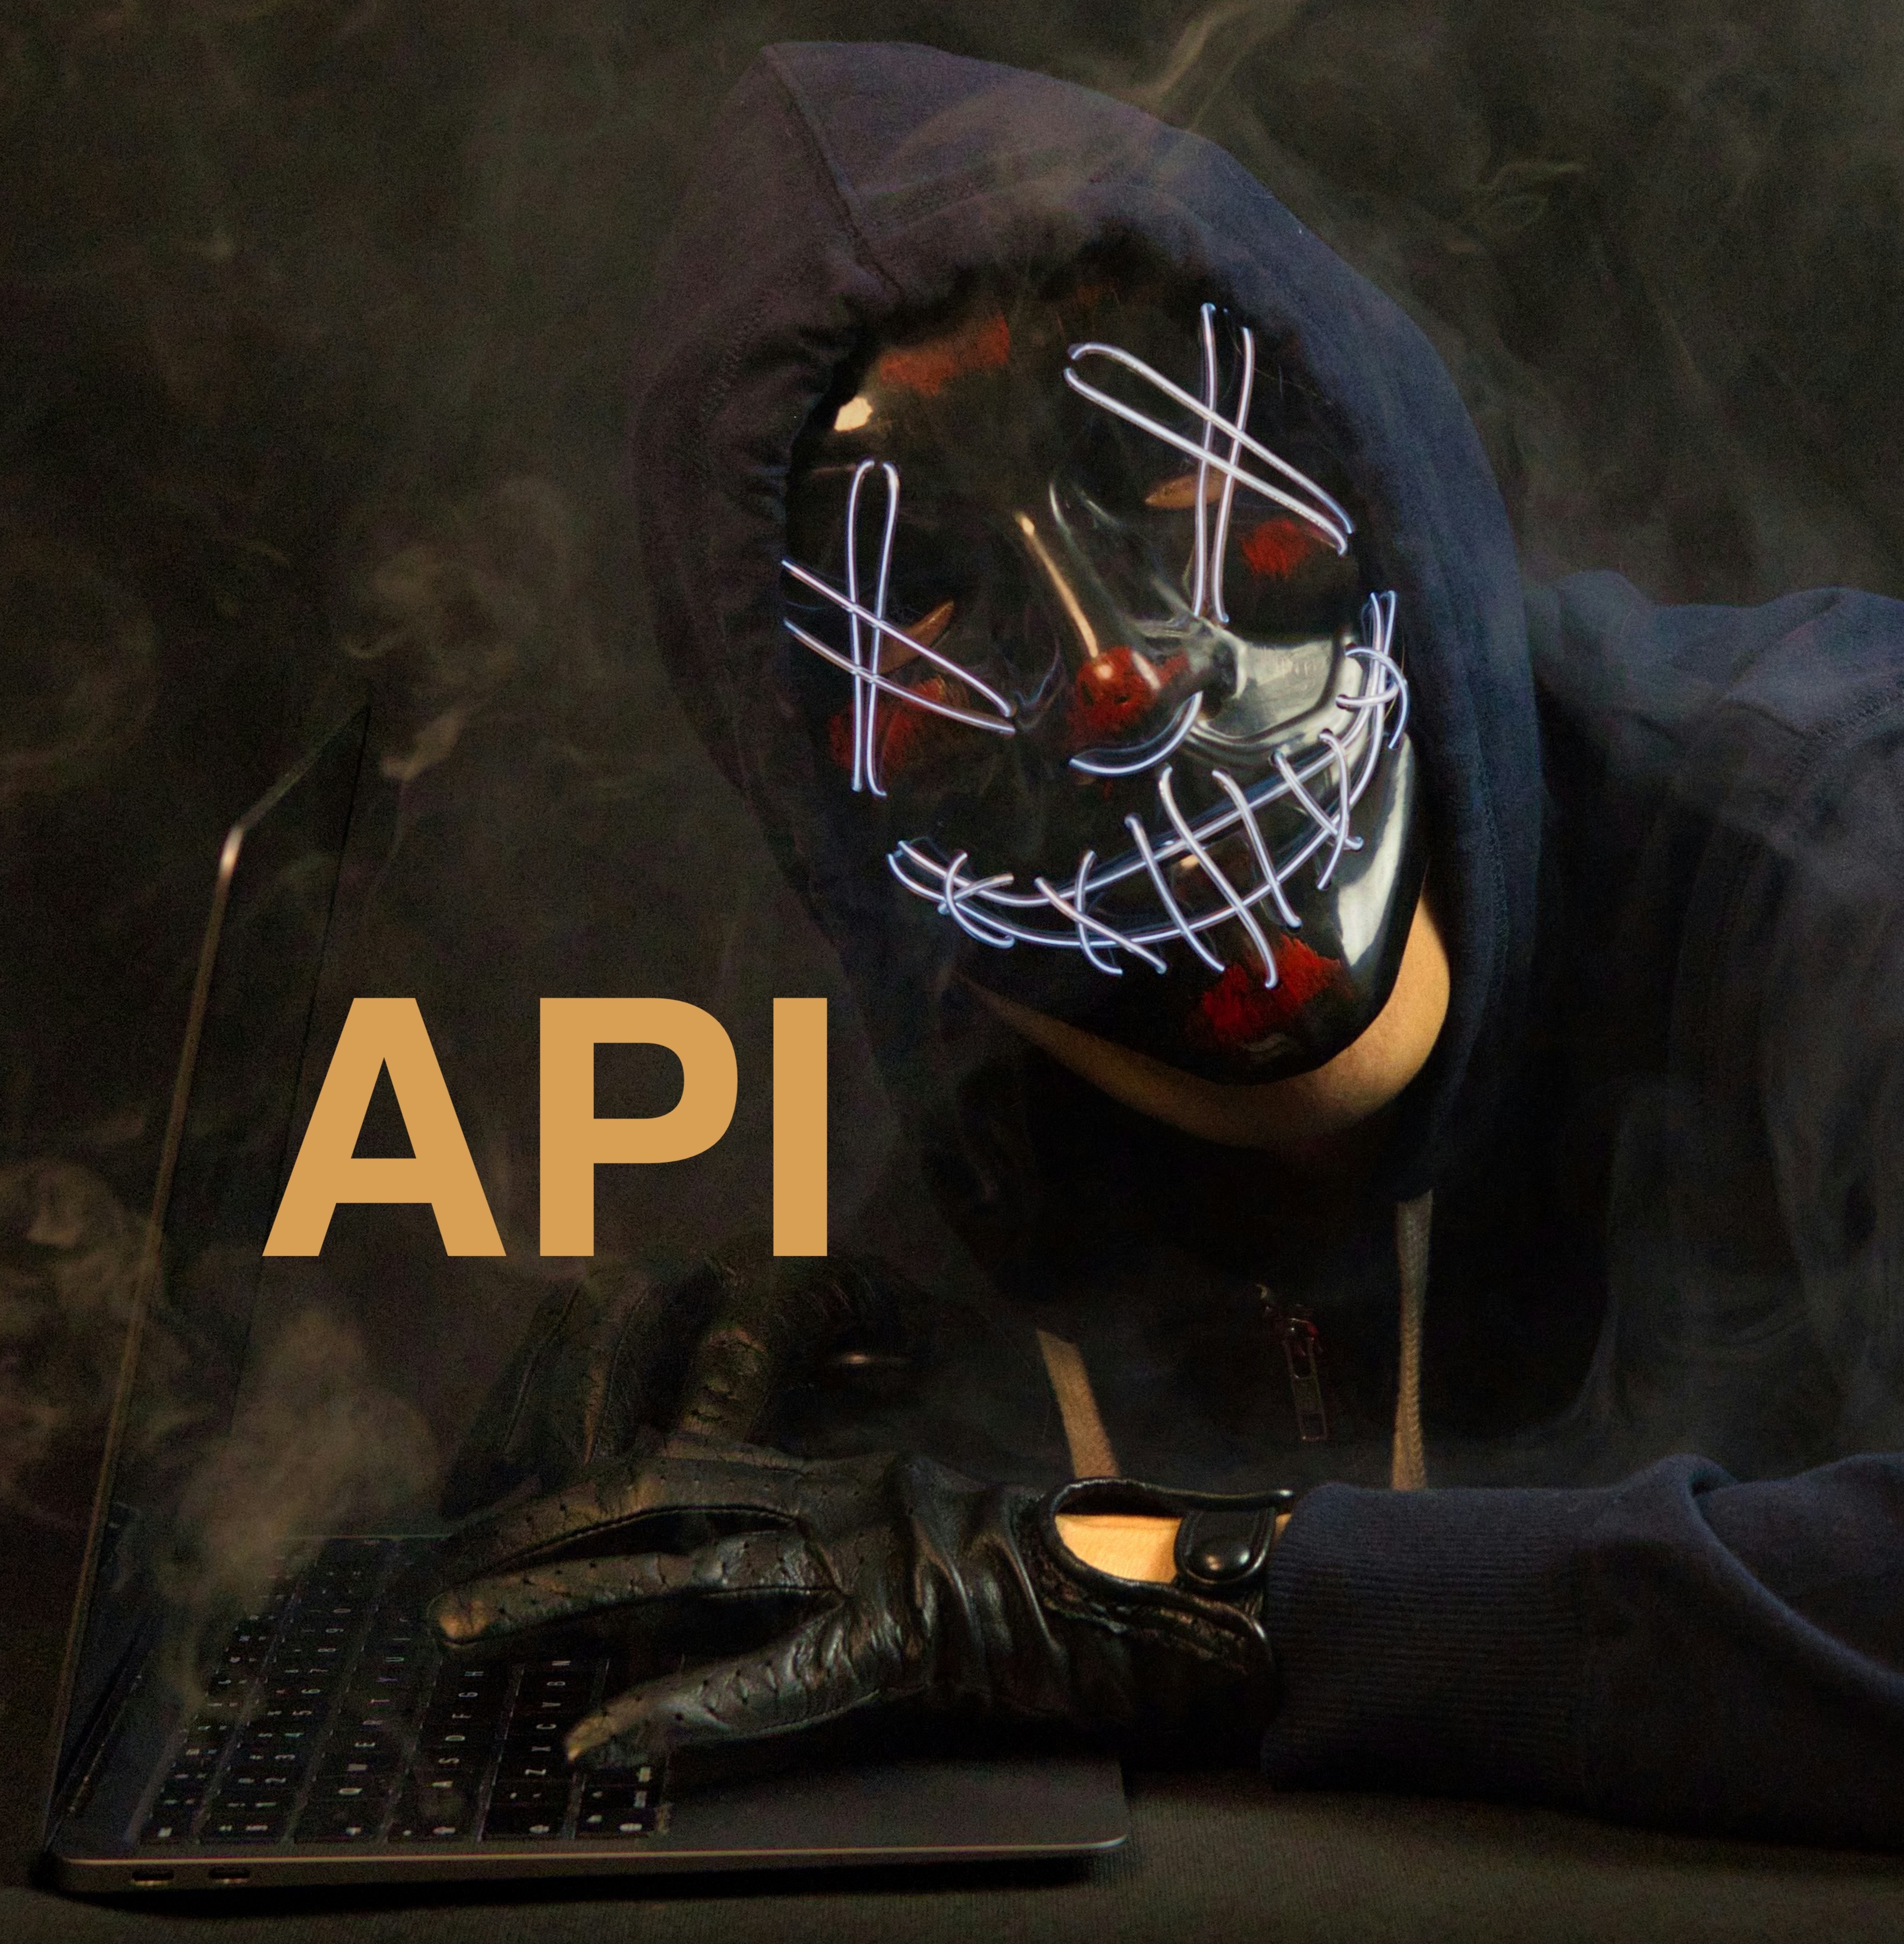 cyber attacker person with laptop and API text